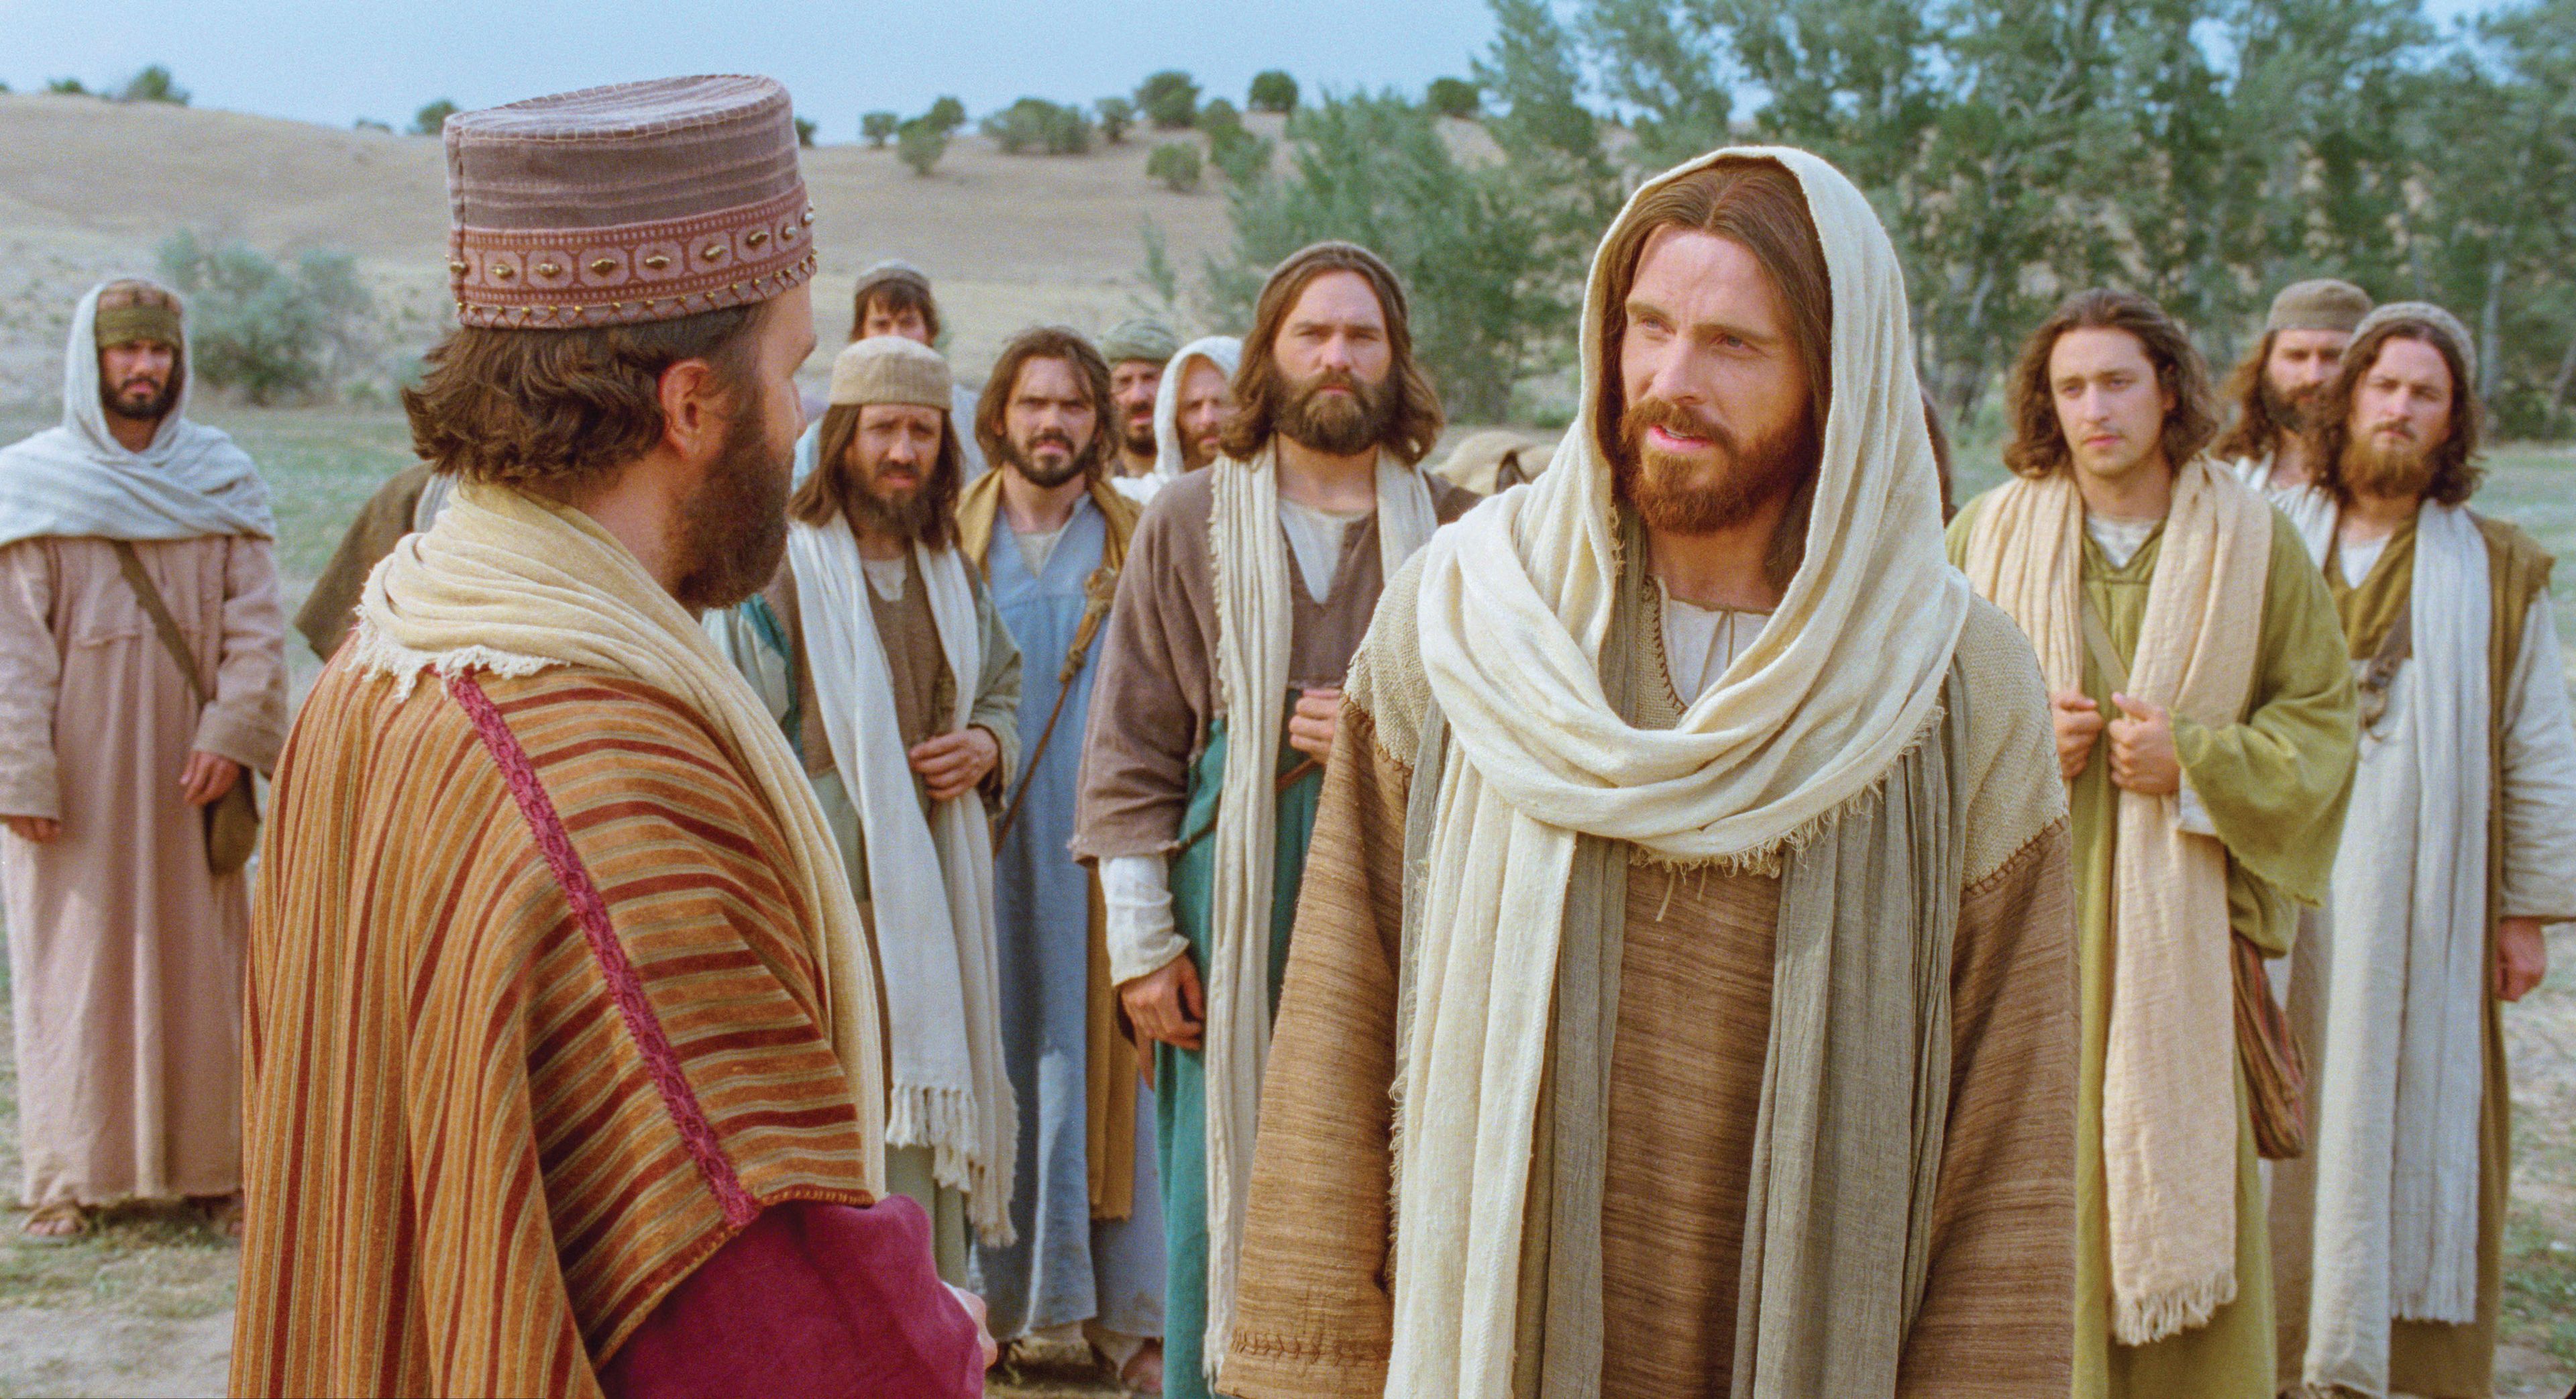 The rich young ruler asks Christ what more he can do to keep the commandments, and Christ responds by telling him to sell his belongings and follow Him.